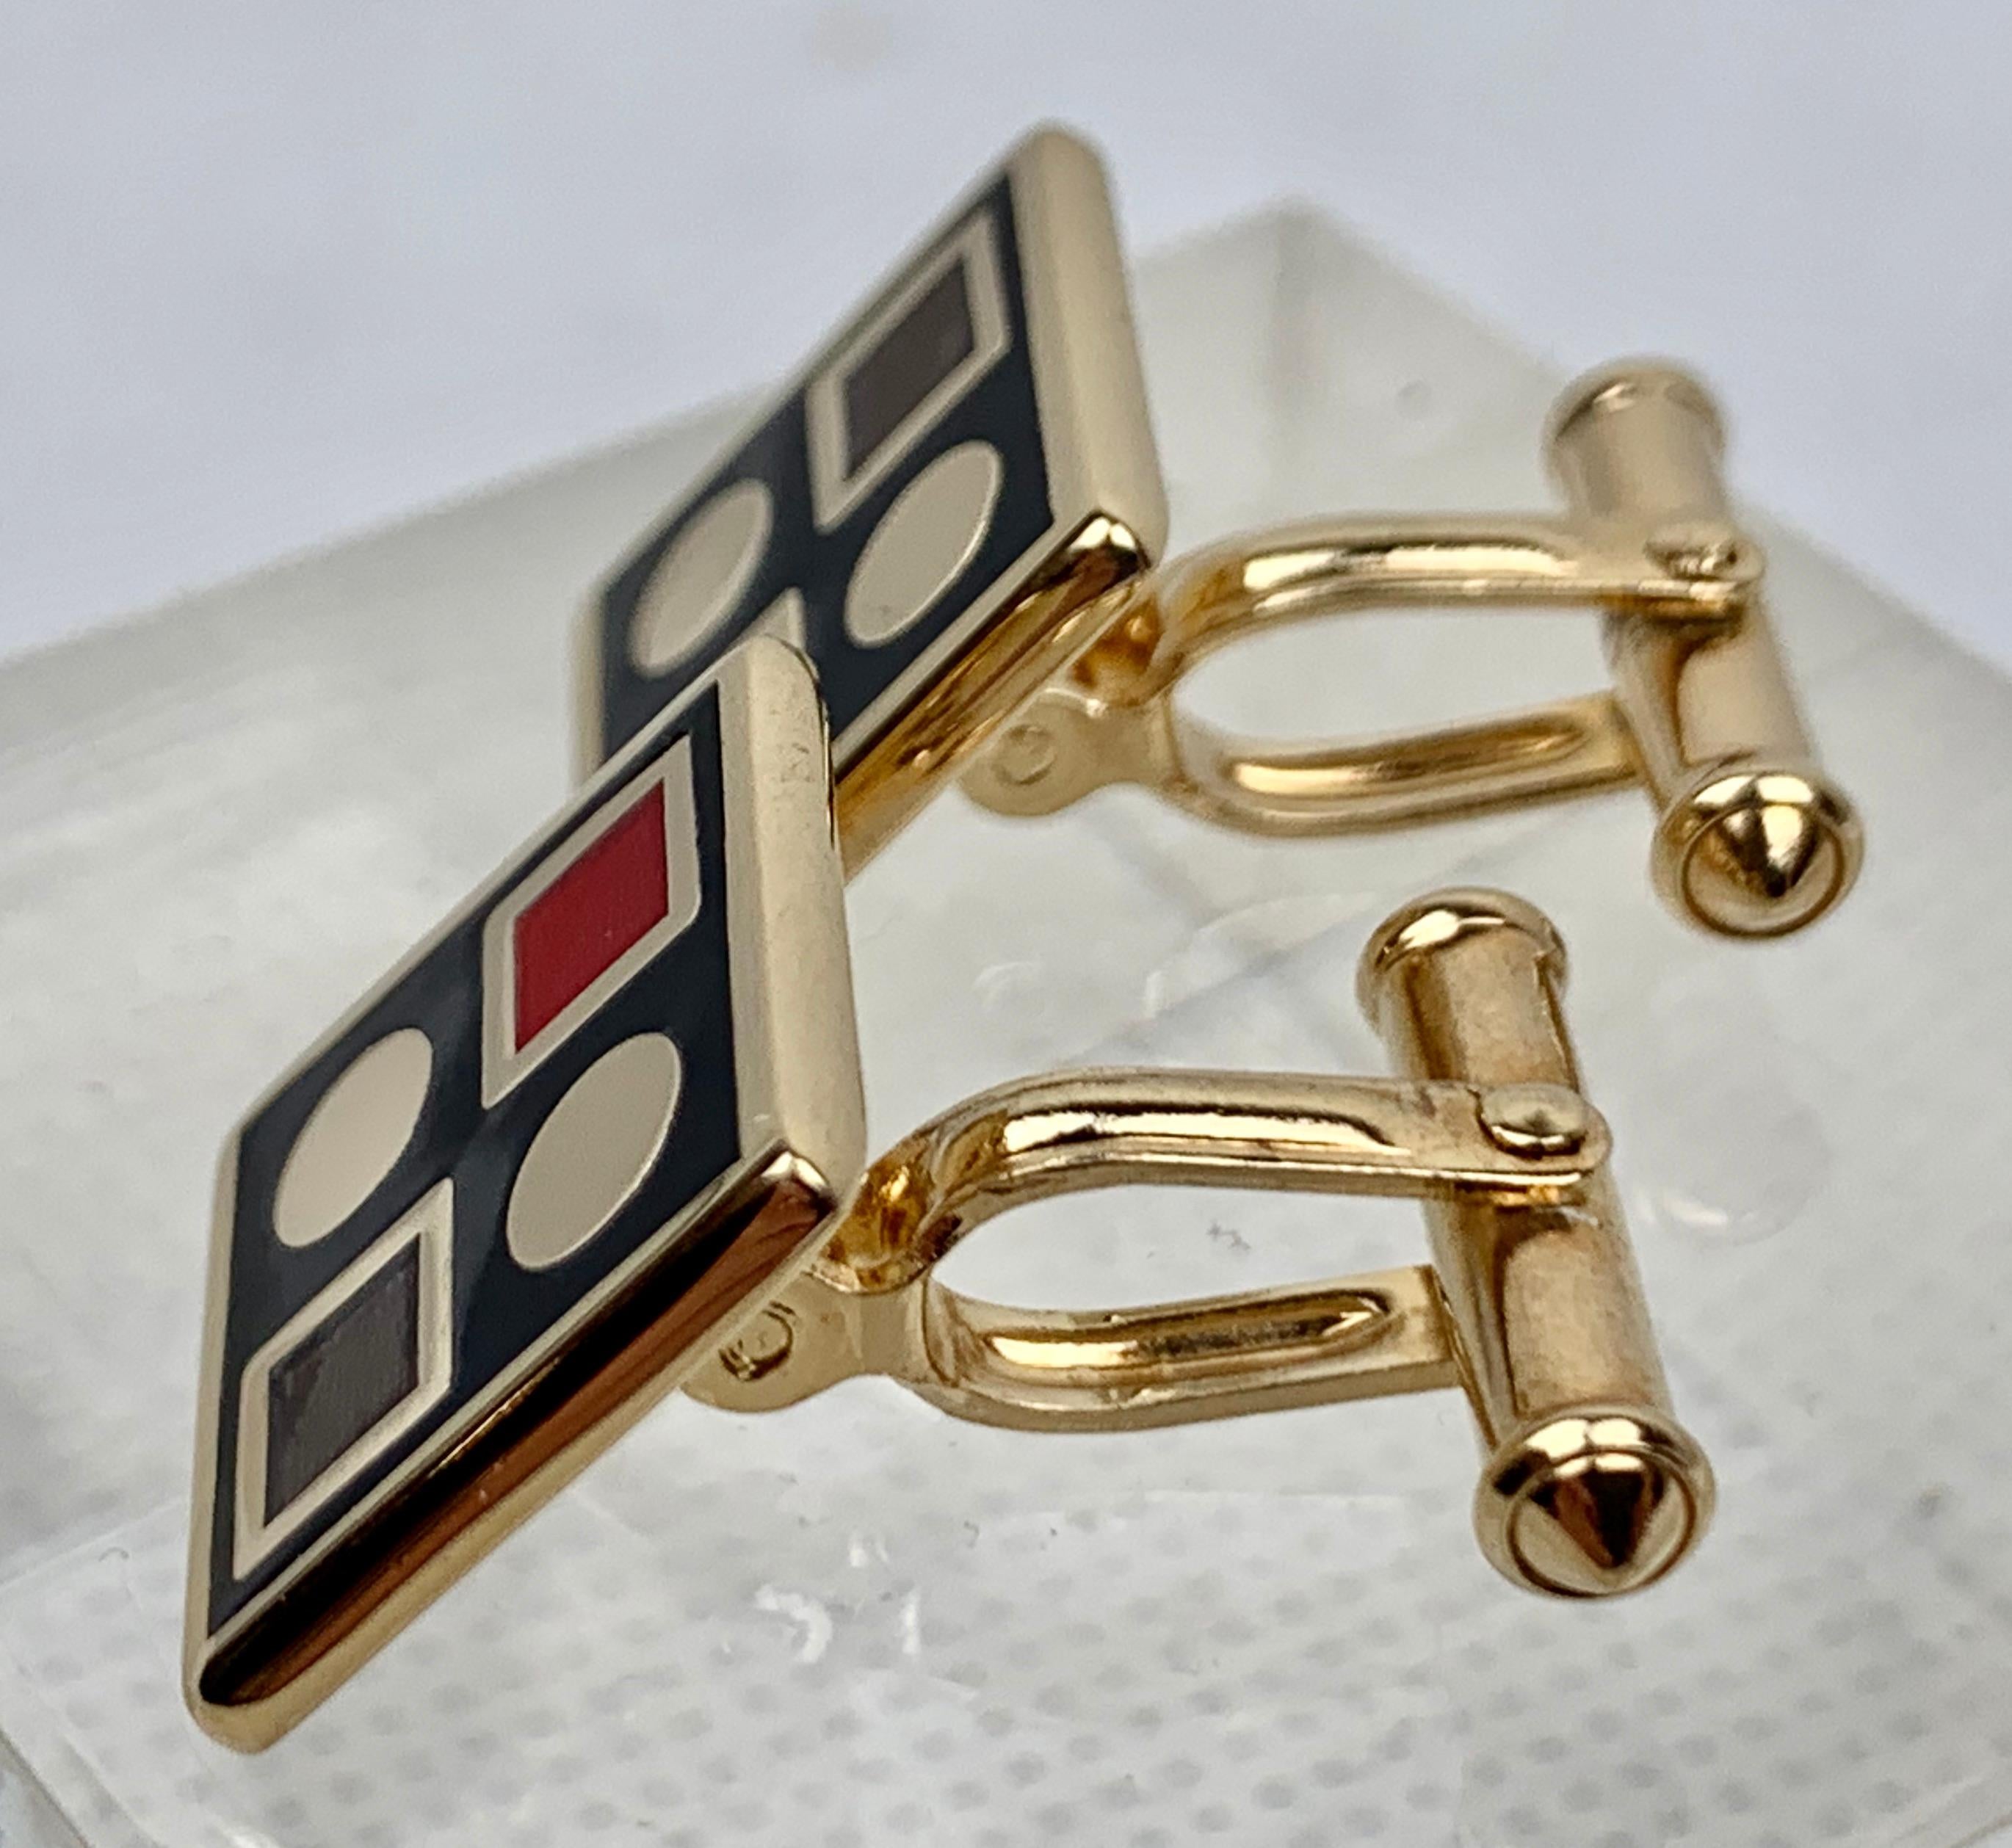 Vintage Geometric Design Cufflinks with Engine Turning and Red/Black Enamel 2